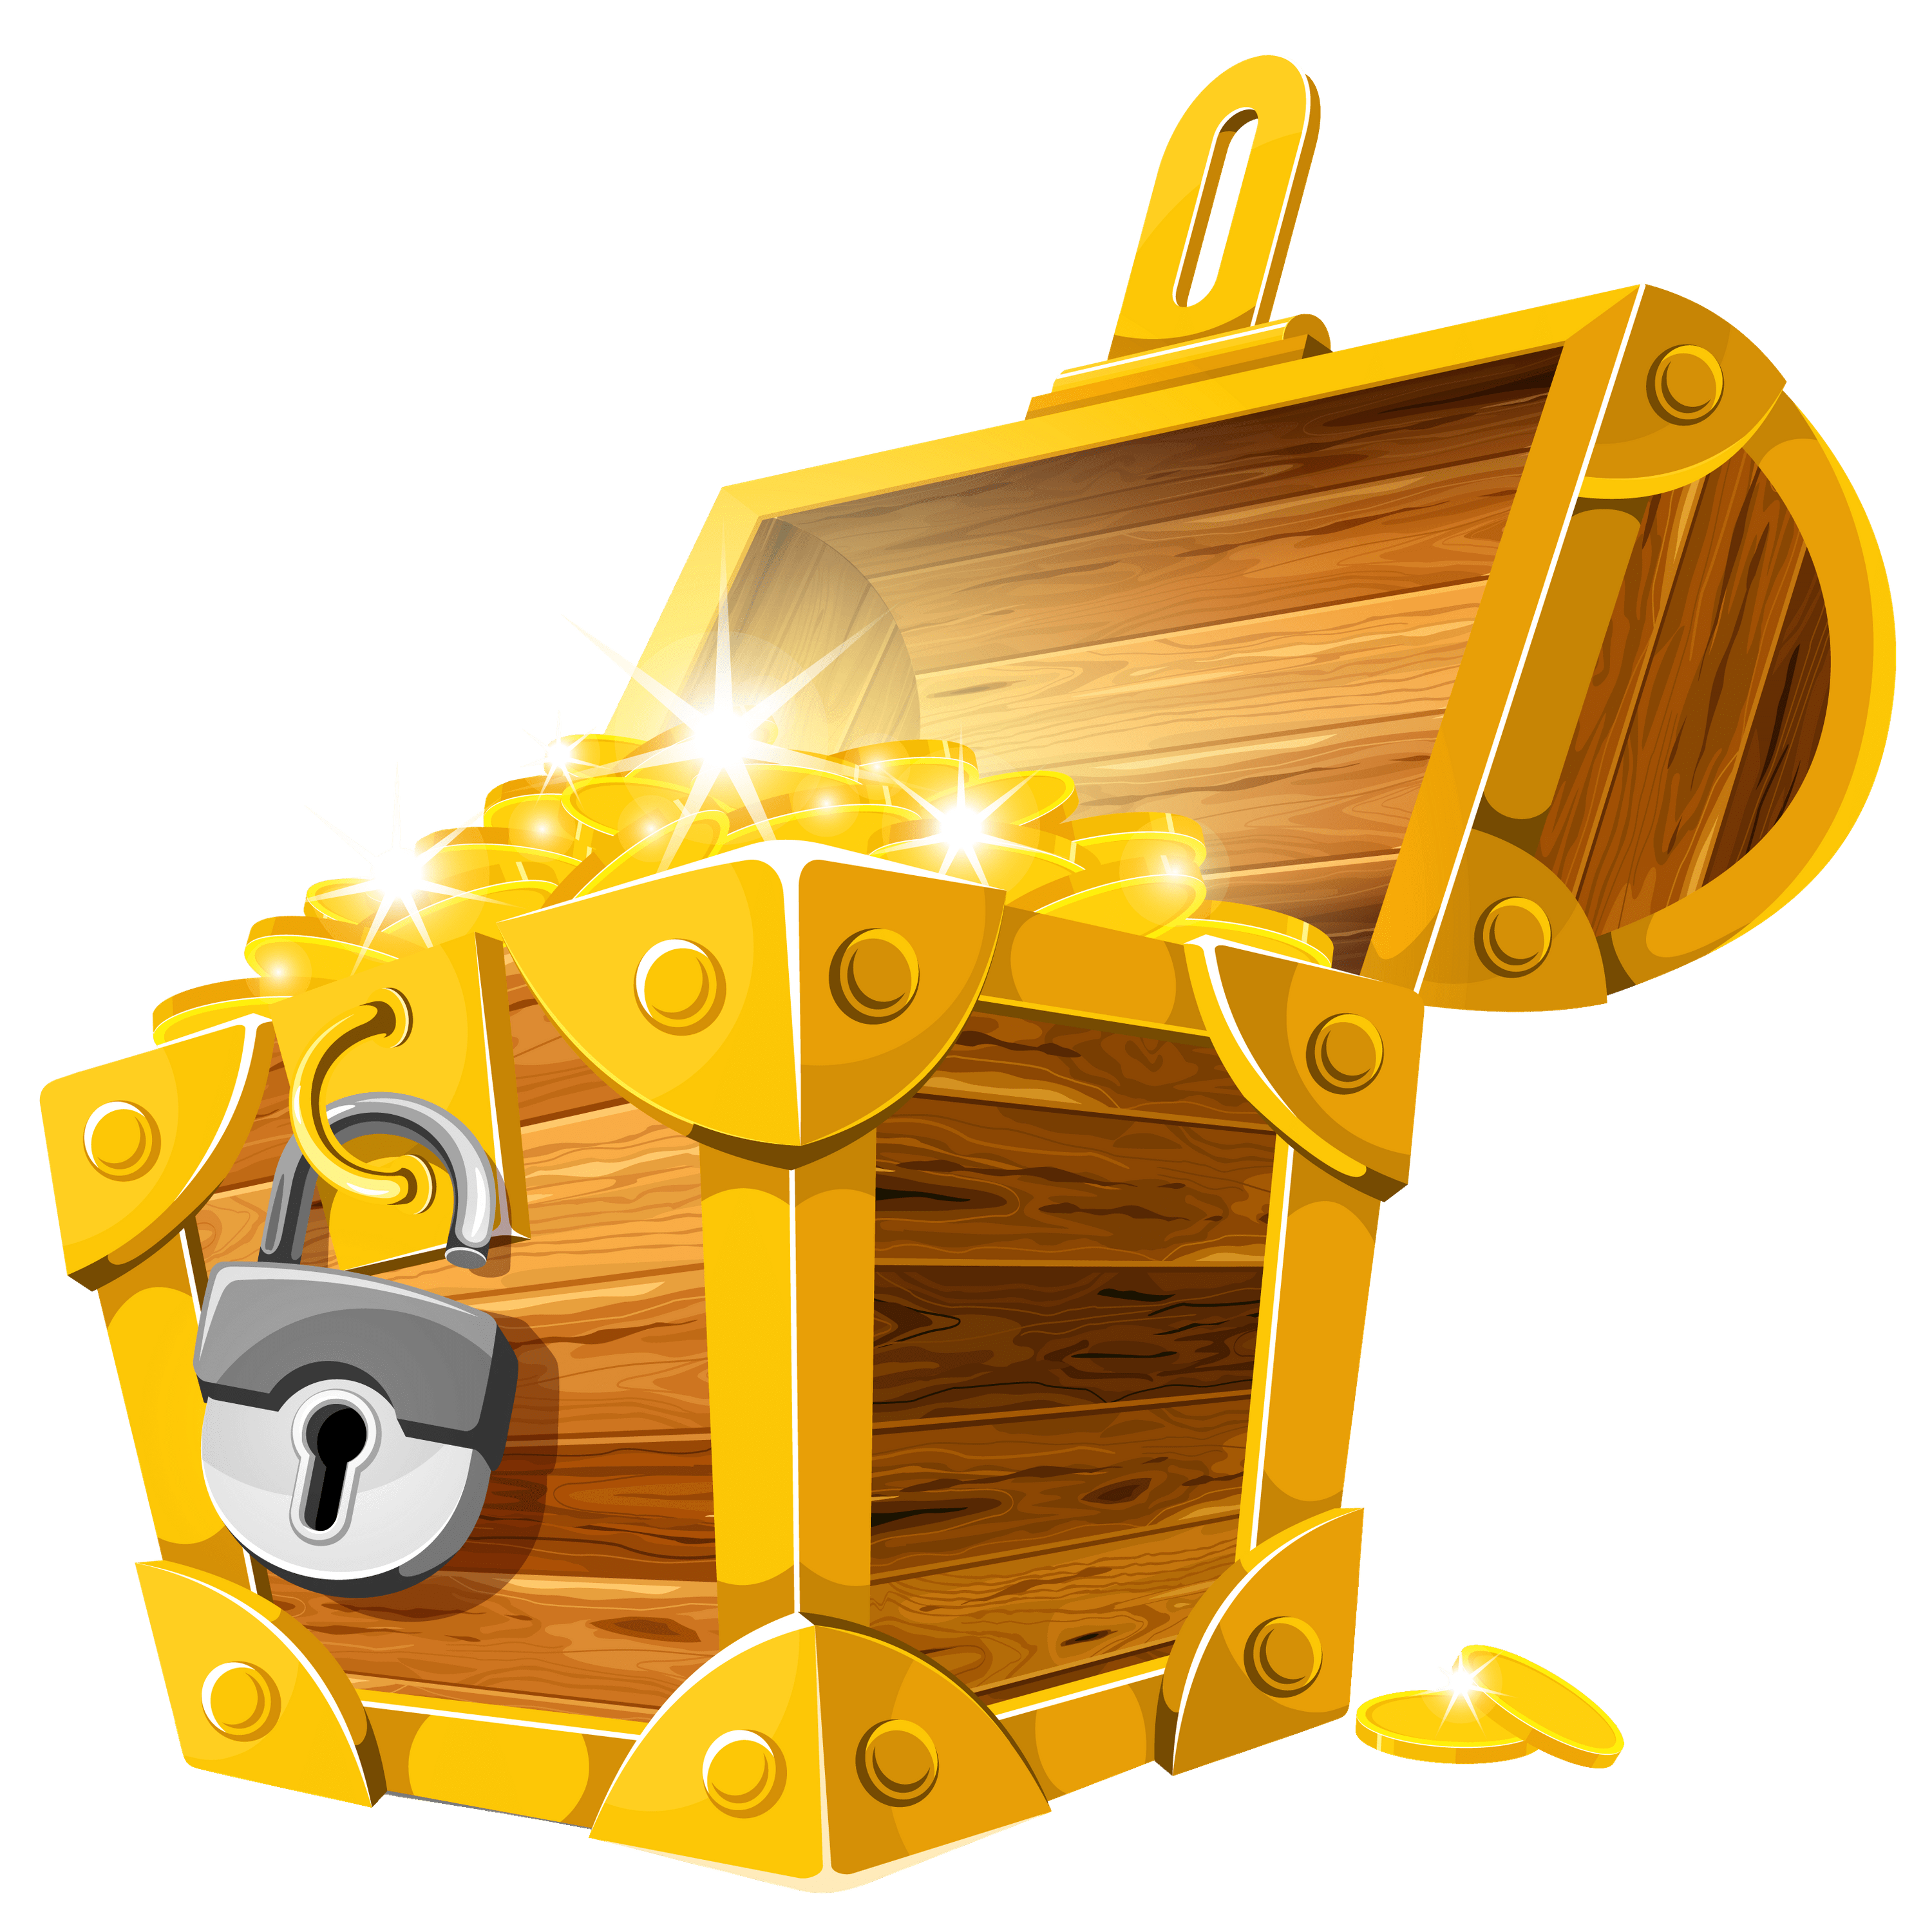 treasure chest png download - 2048*2048 - Free Transparent